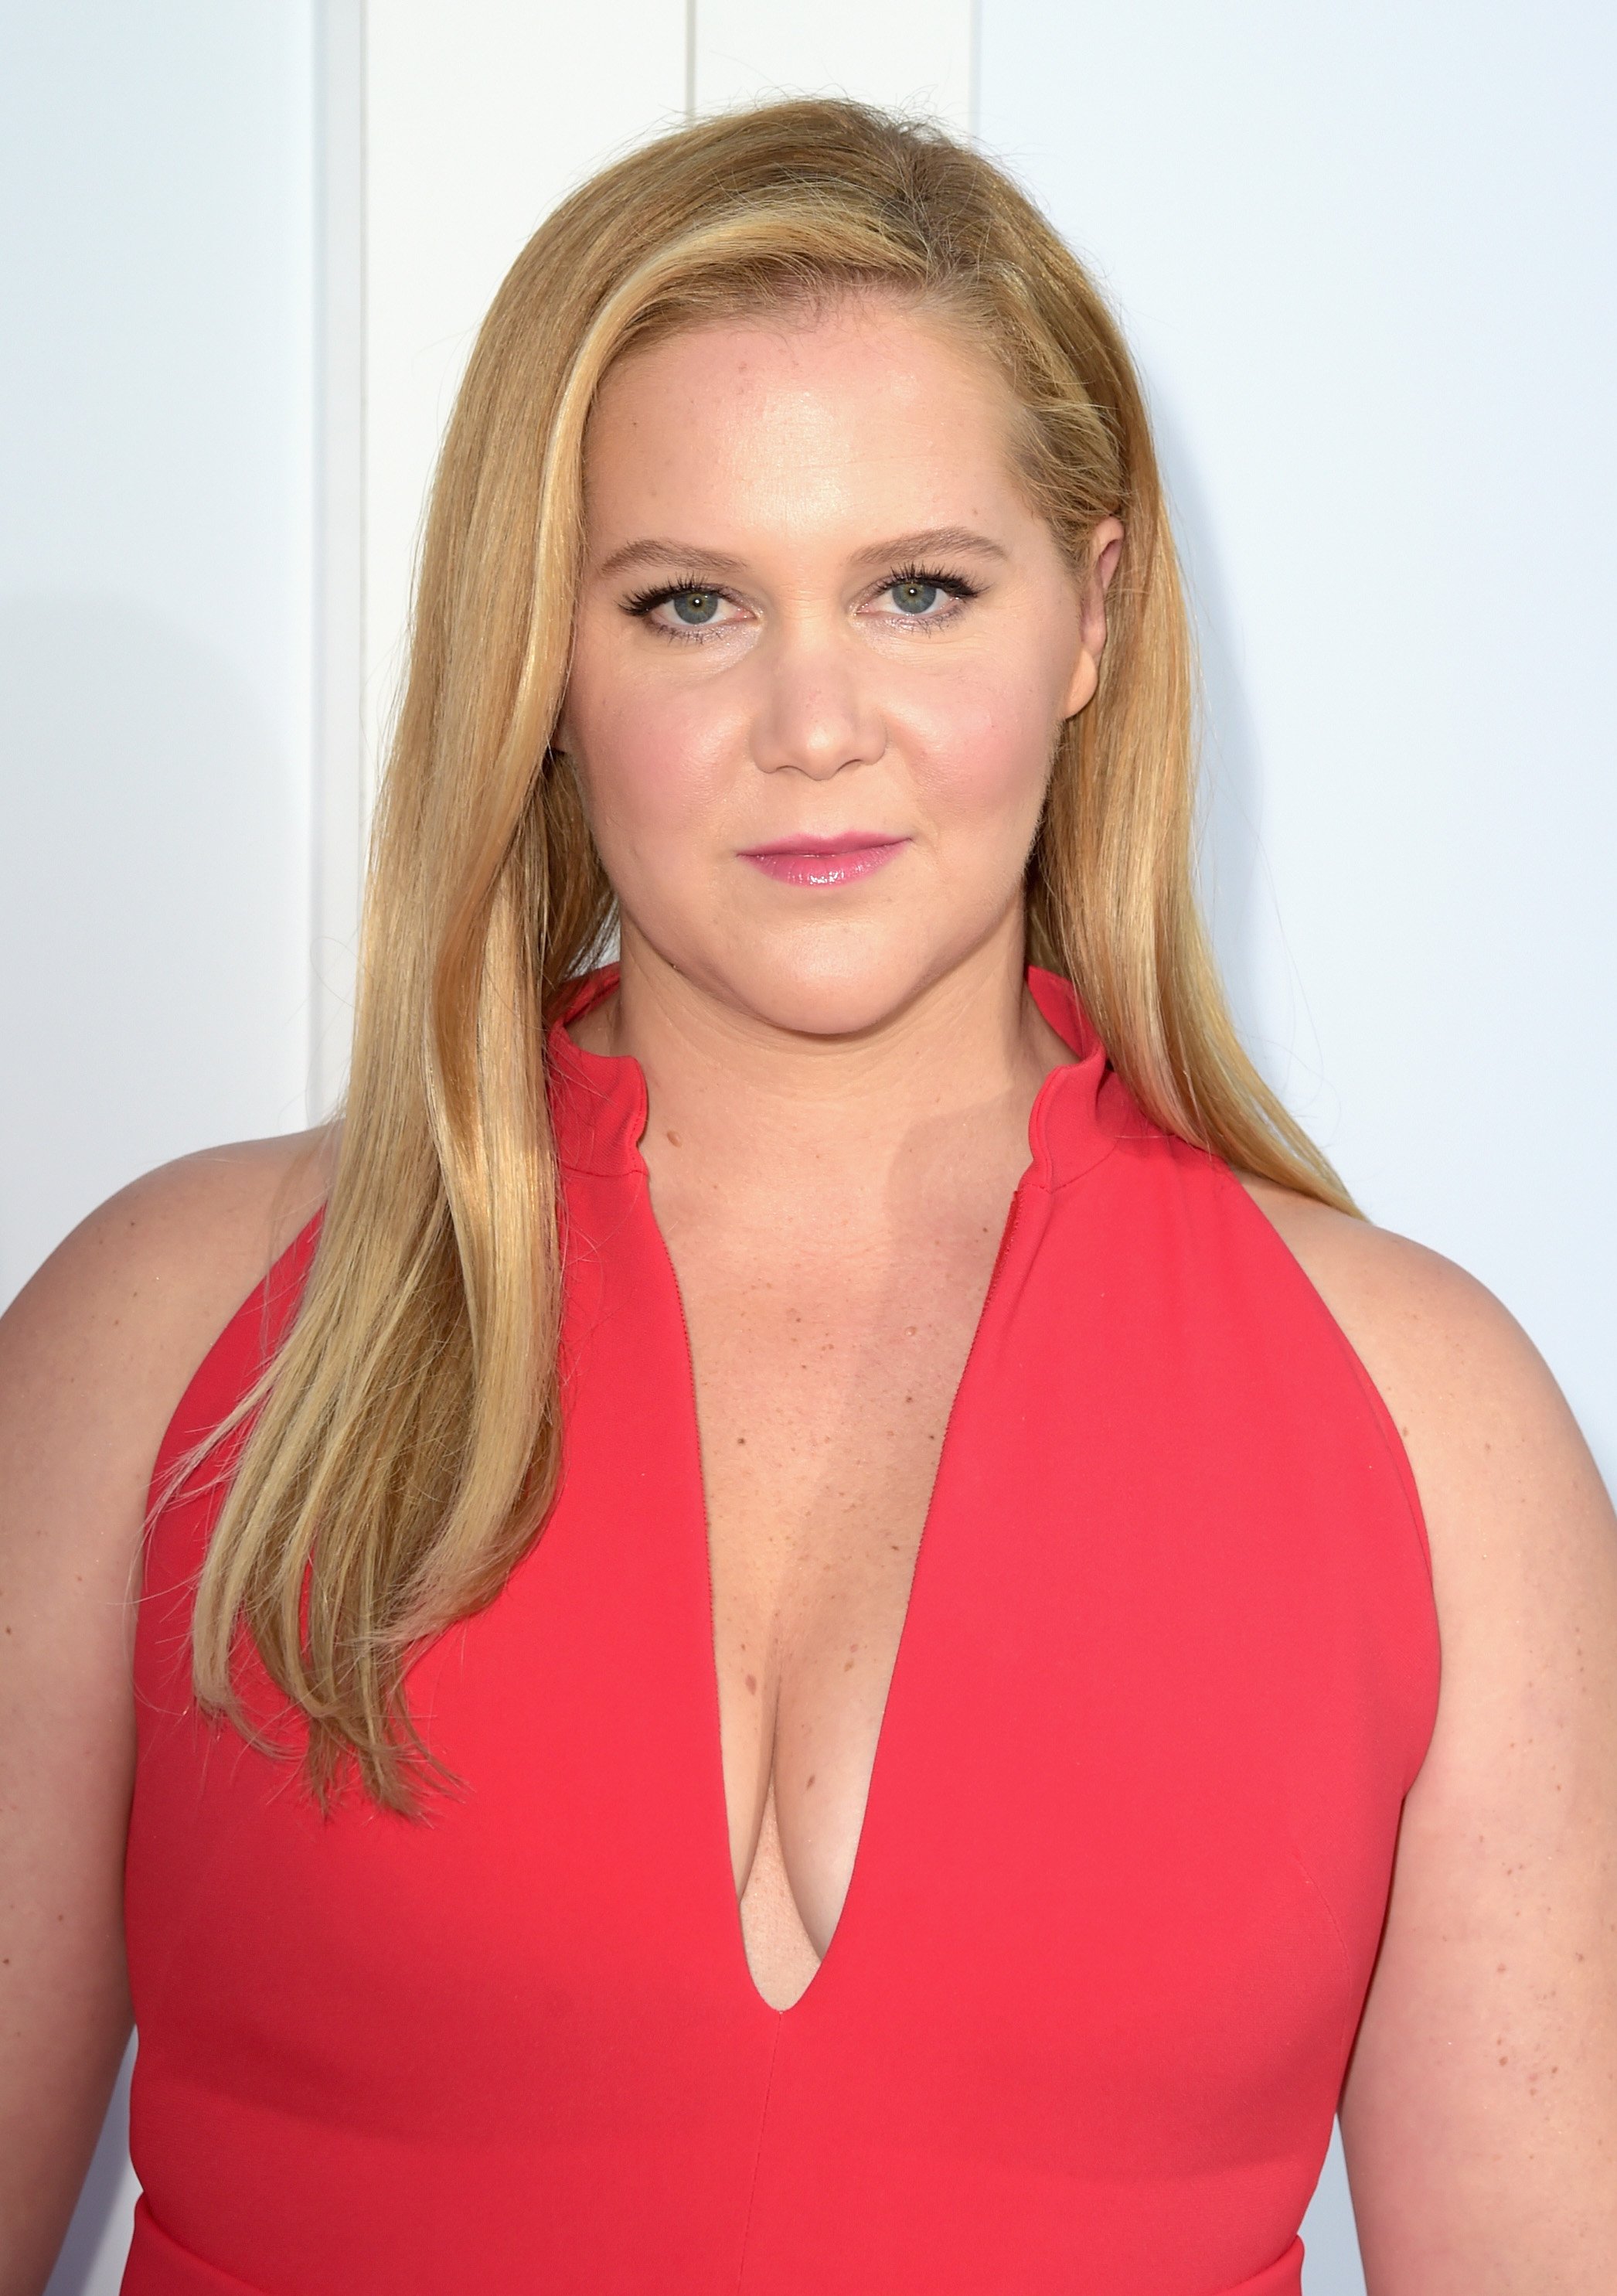  Amy Schumer attends the premiere of STX Films' "I Feel Pretty." | Source: Getty Images